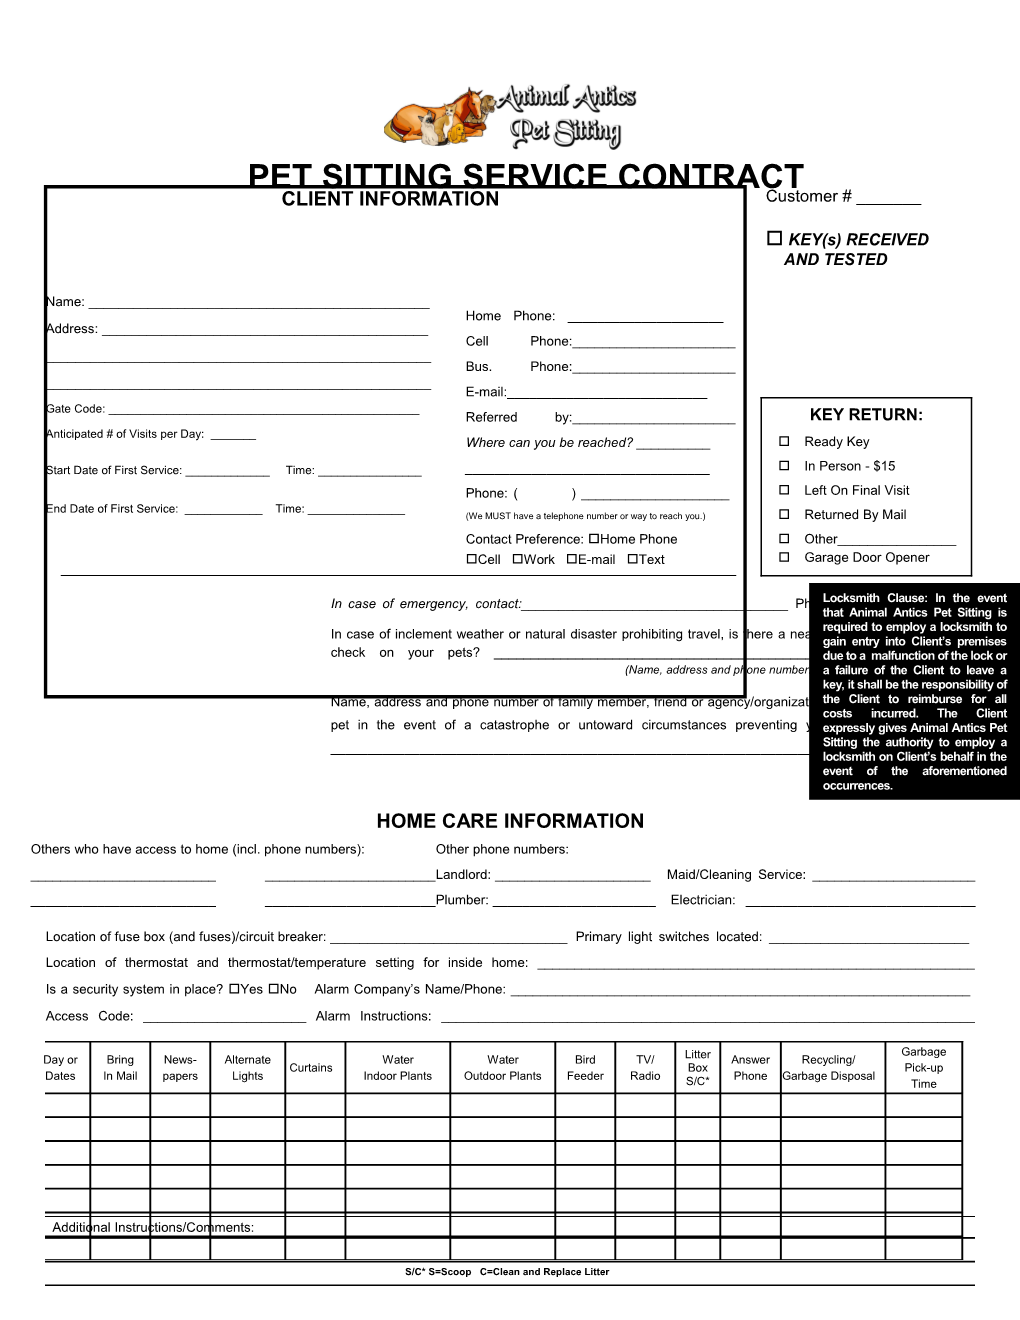 Pet Sitting Service Contract